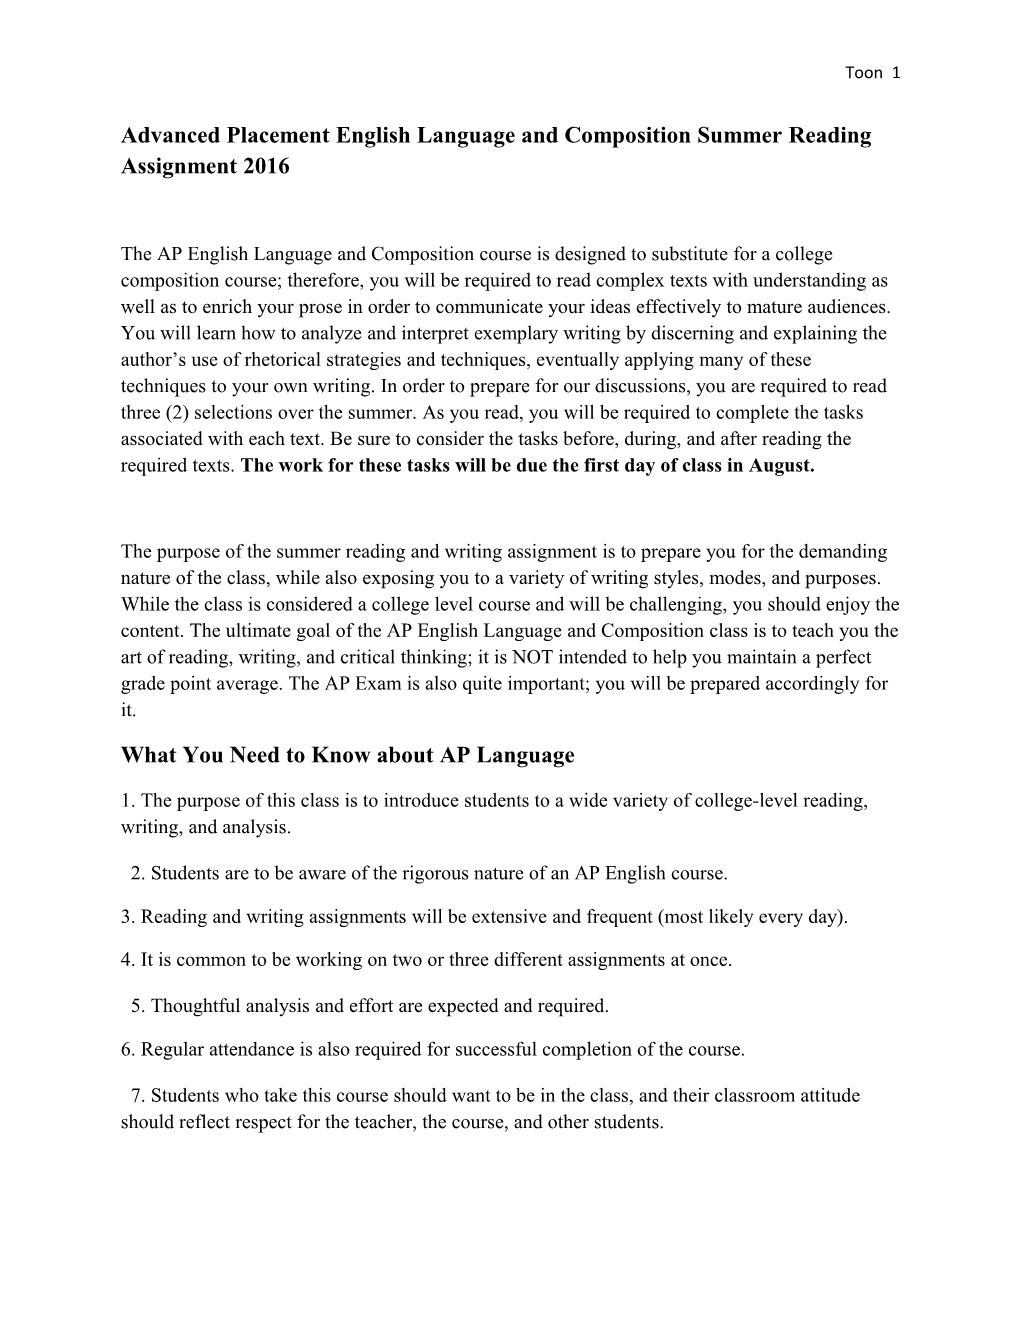 Advanced Placement English Language and Composition Summer Reading Assignment 2016